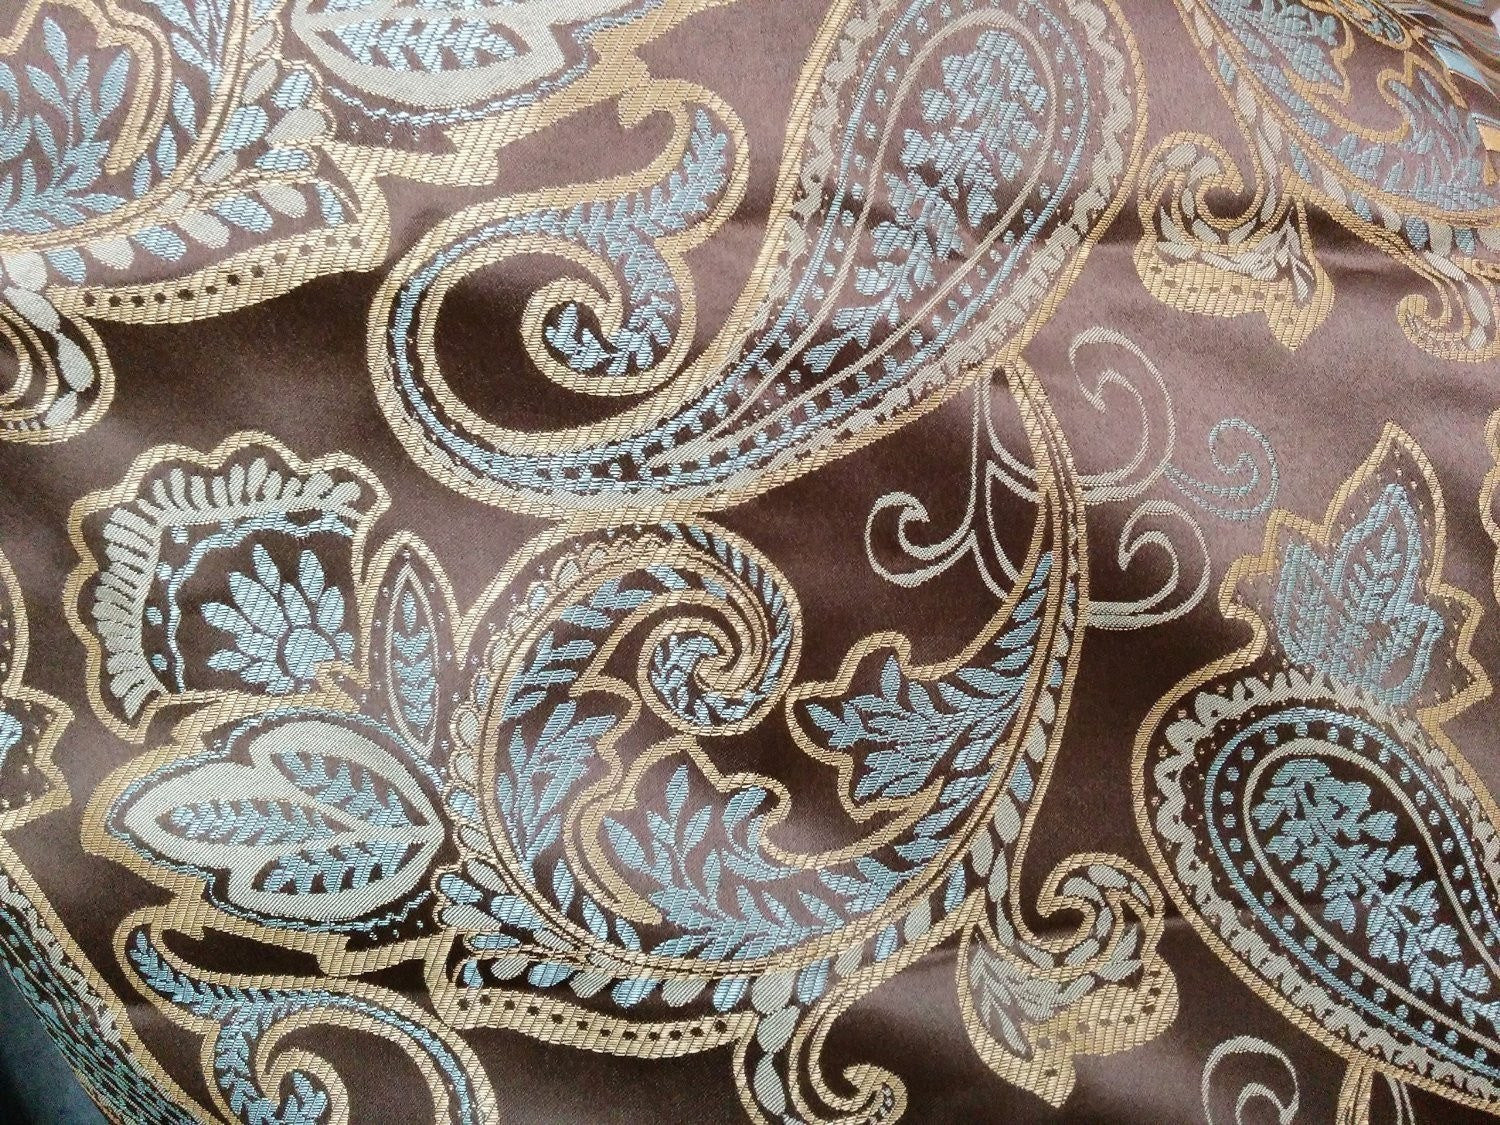 Tache Chenille Elegant Paisley Floral Striped Brown Blue Eastern Comforter Set With Zipper Cover (14070) - Tache Home Fashion